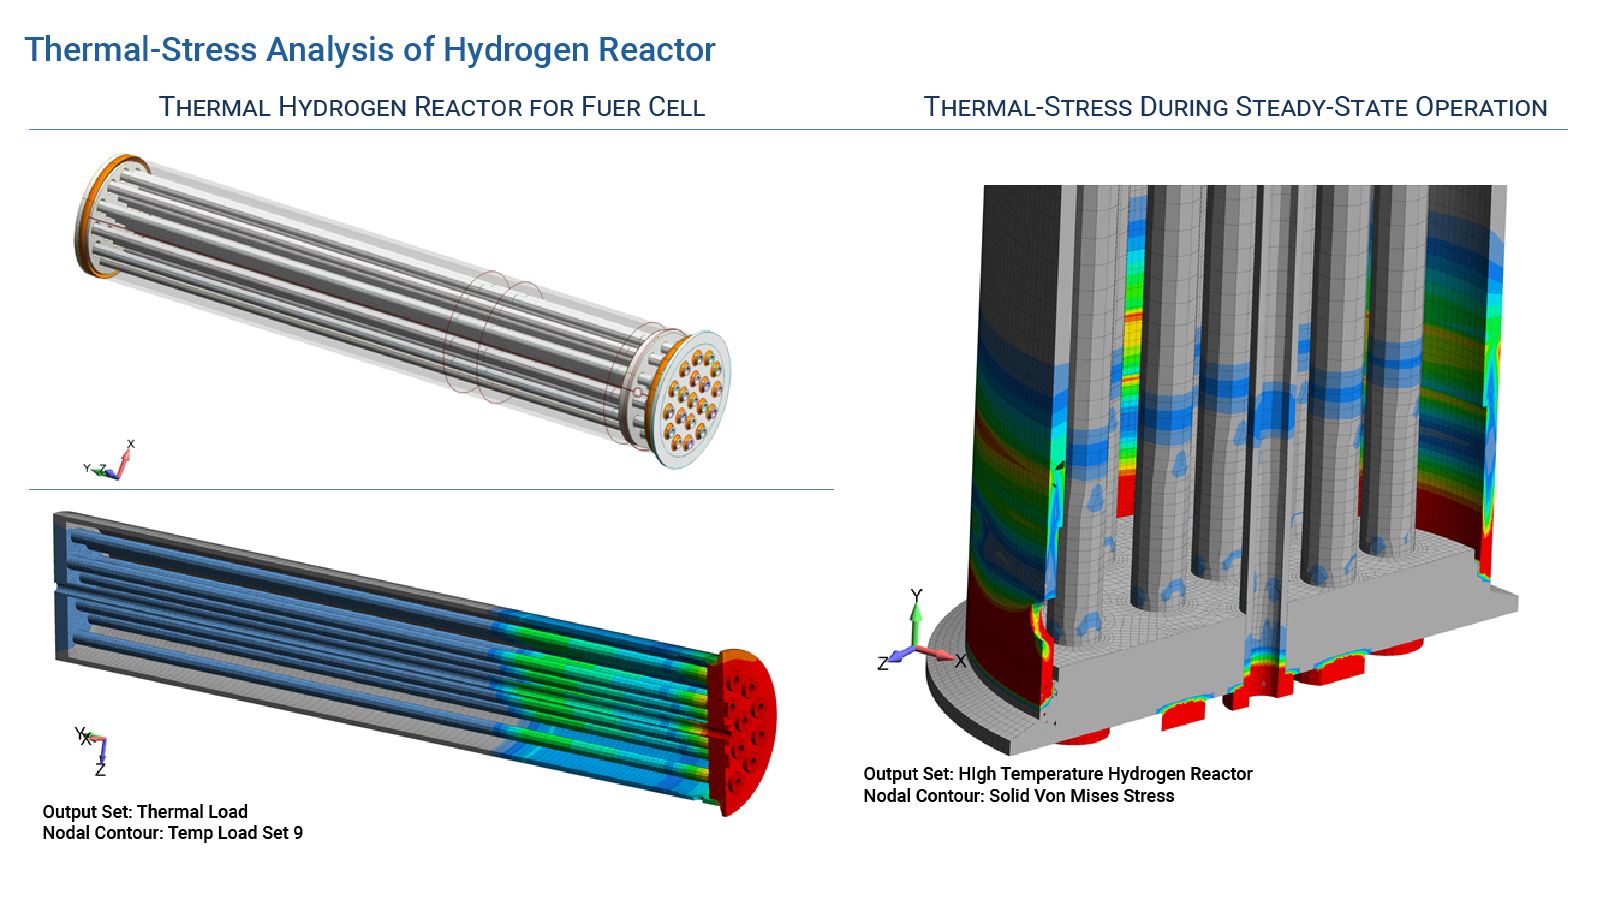 Thermal-Stress Analysis of Hydrogen Reactor - FEA Thermal-Stress Consulting Services